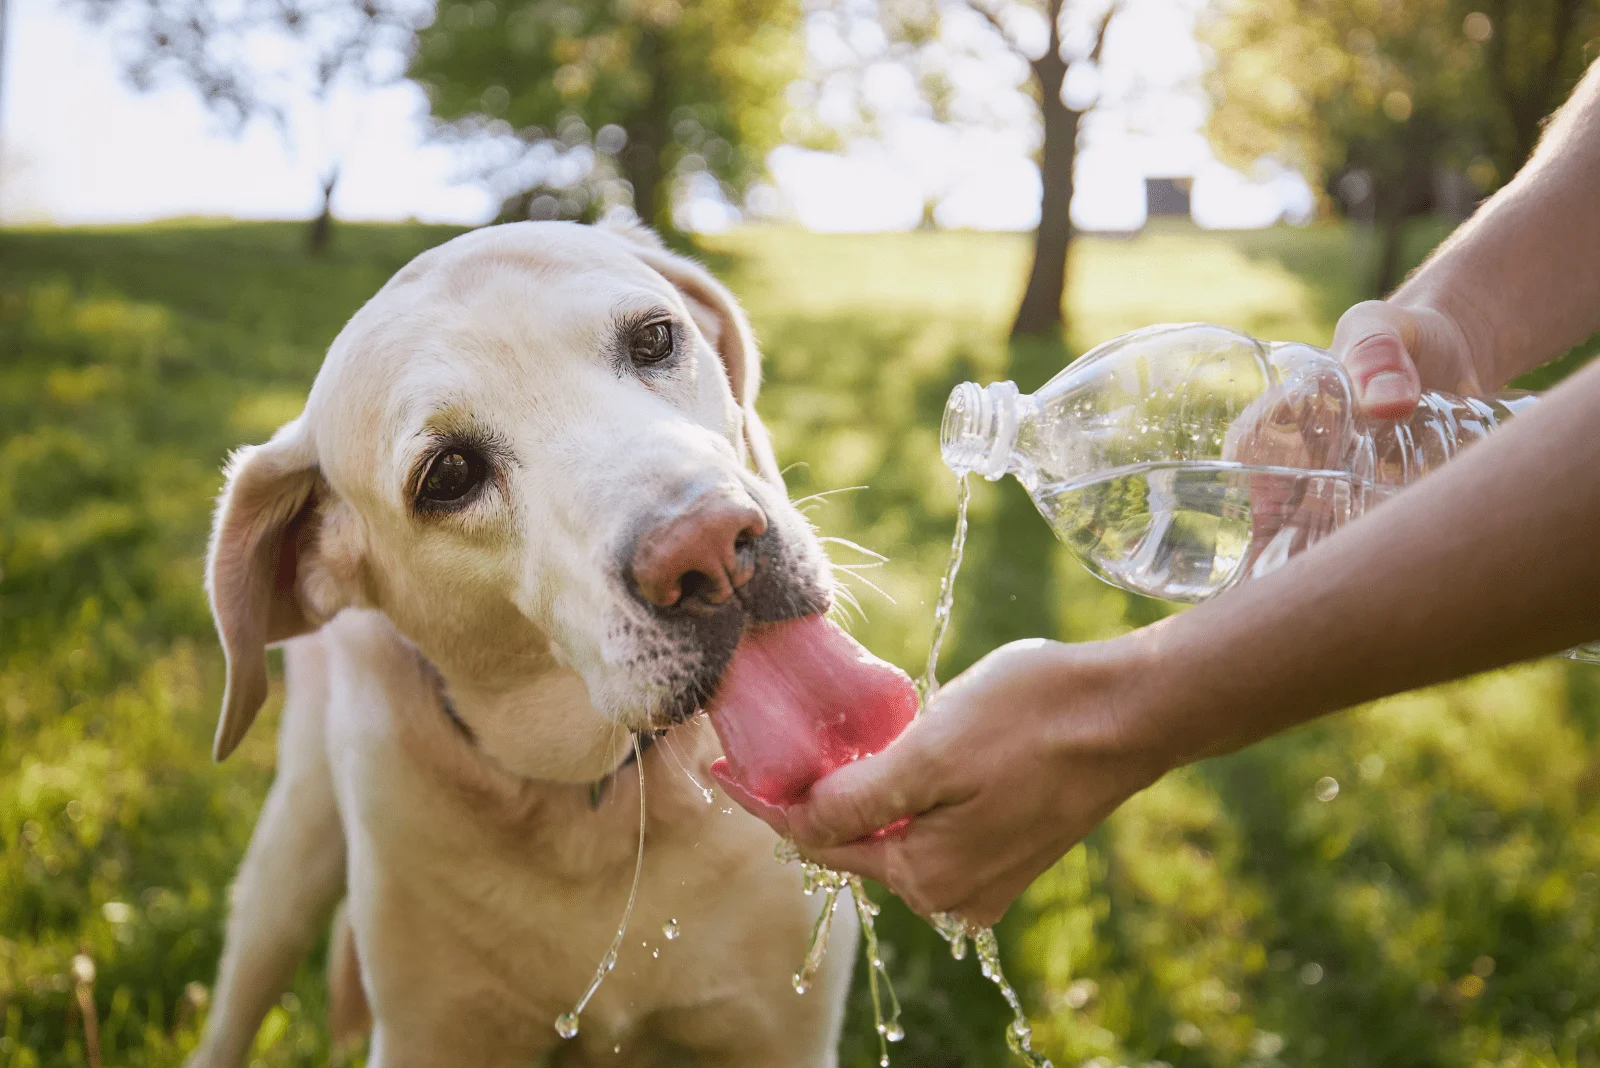 the dog drinks water from the hand